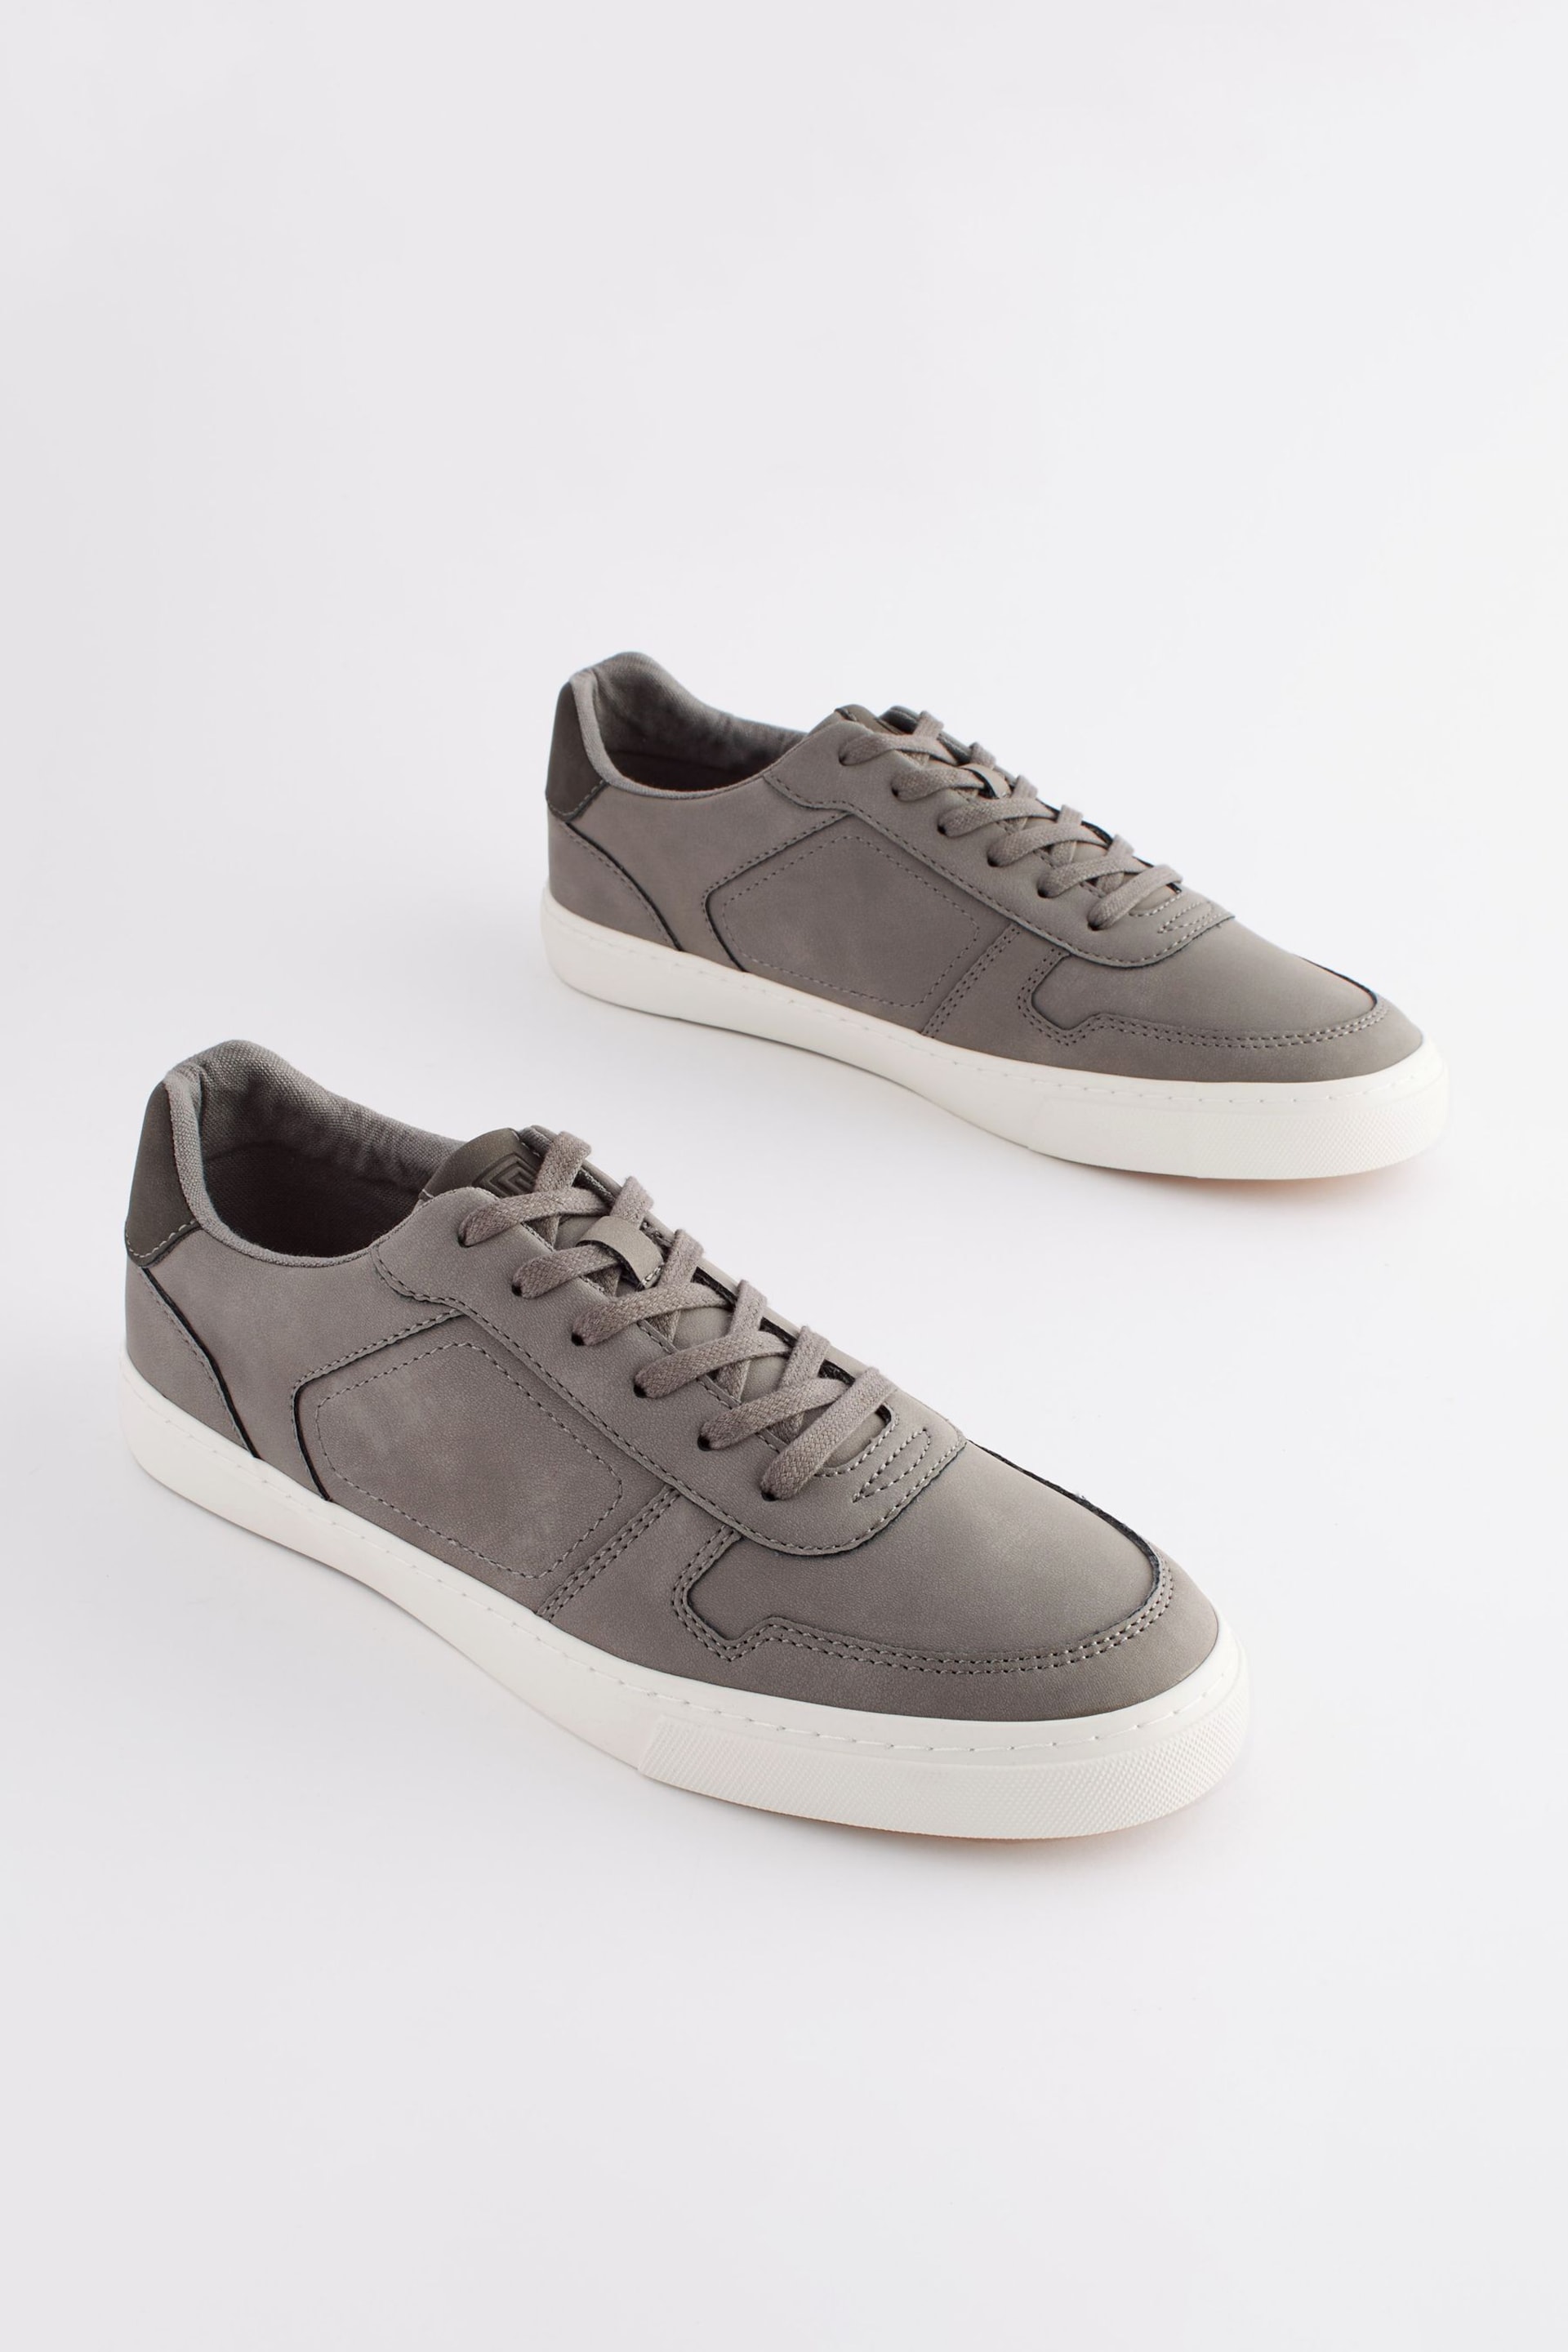 Grey Lace Up Low Trainers - Image 1 of 5